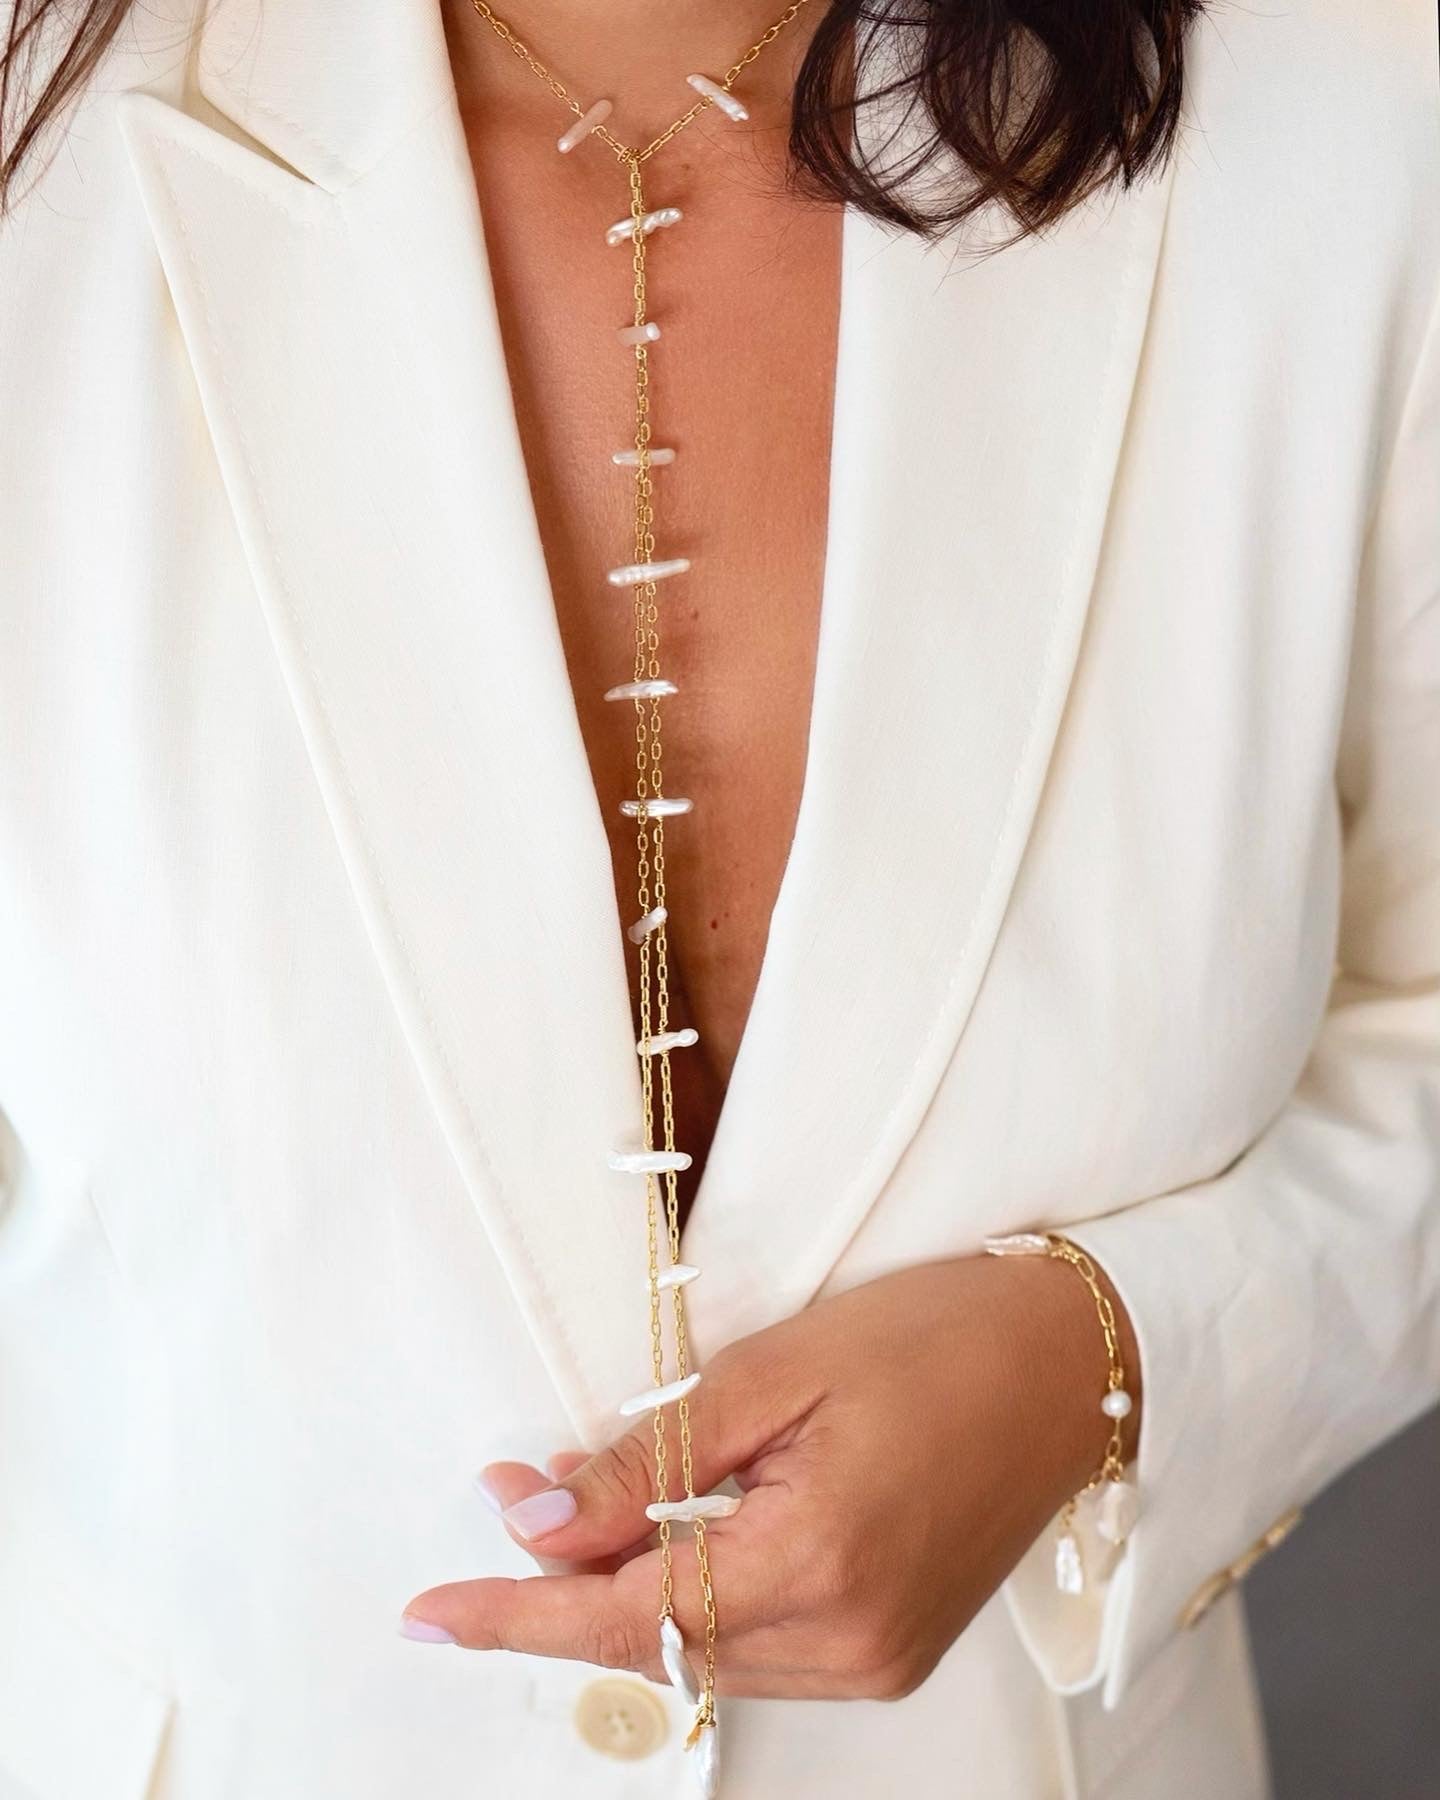 Purchase the High-Quality Lariat Necklaces | GLAMIRA.com